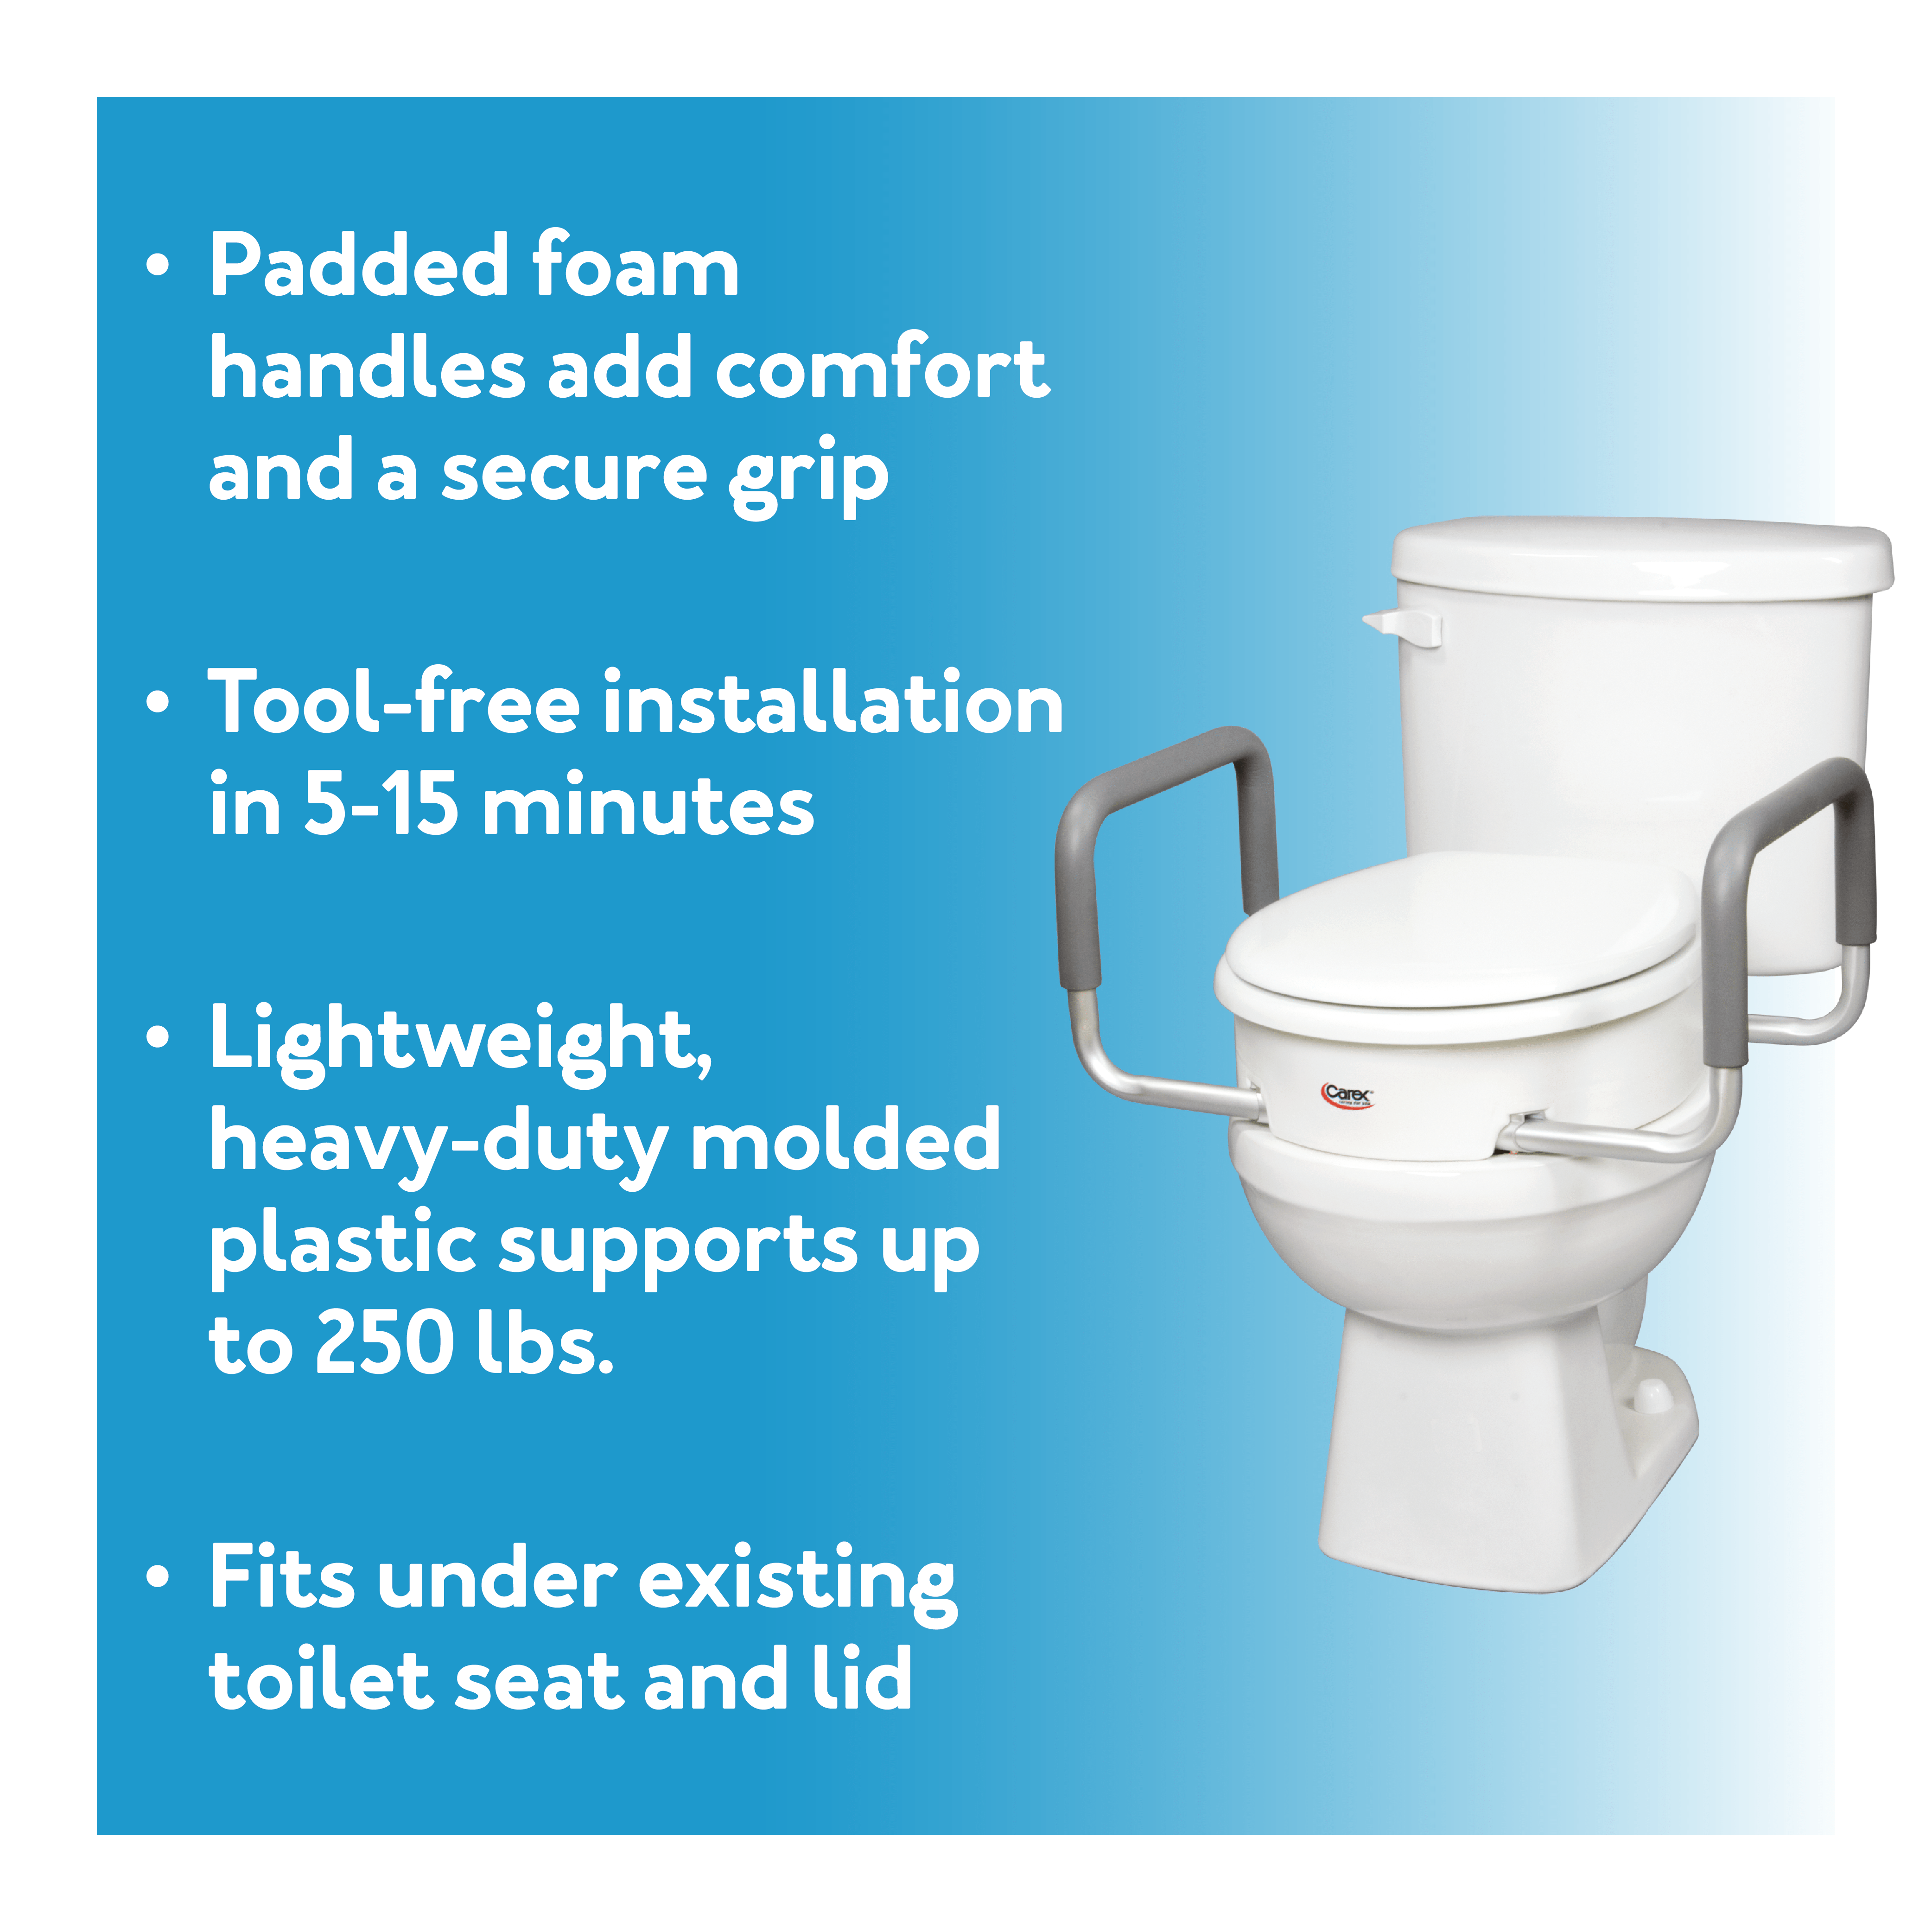 Carex Toilet Seat Elevator With Handles - For Standard Toilet Seats - Carex Health Brands